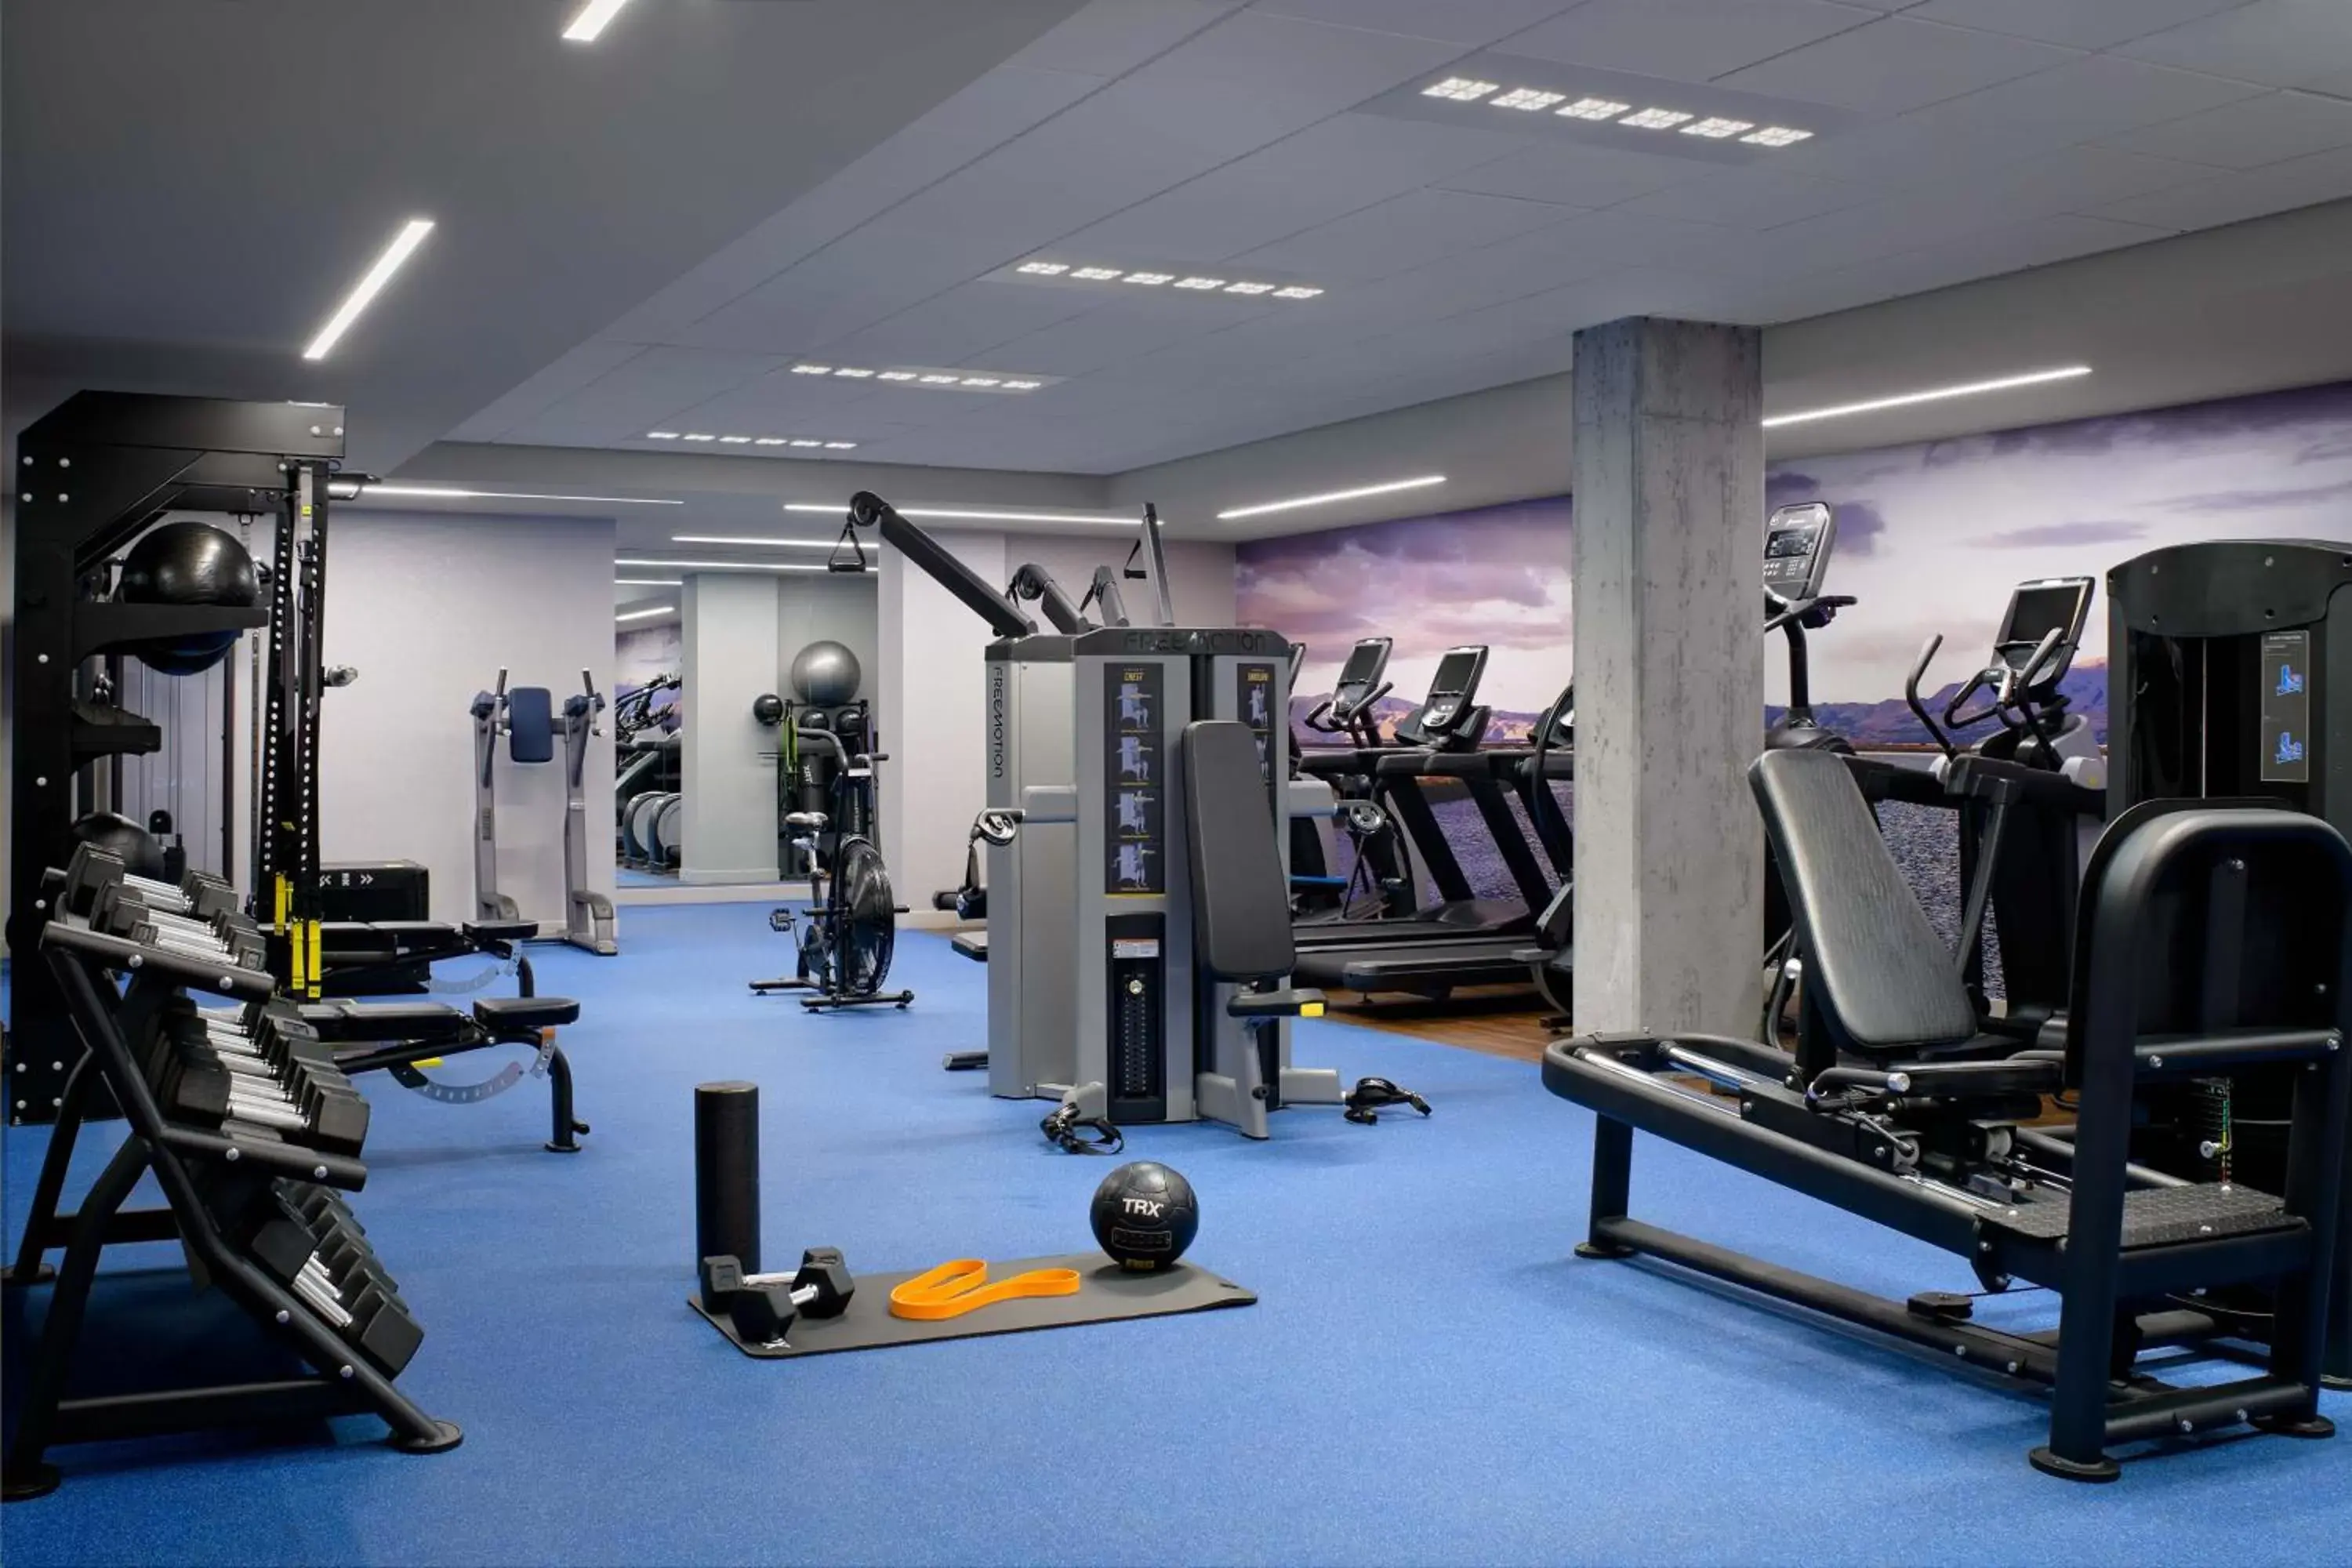 Fitness centre/facilities, Fitness Center/Facilities in LUMA Hotel San Francisco - #1 Hottest New Hotel in the US